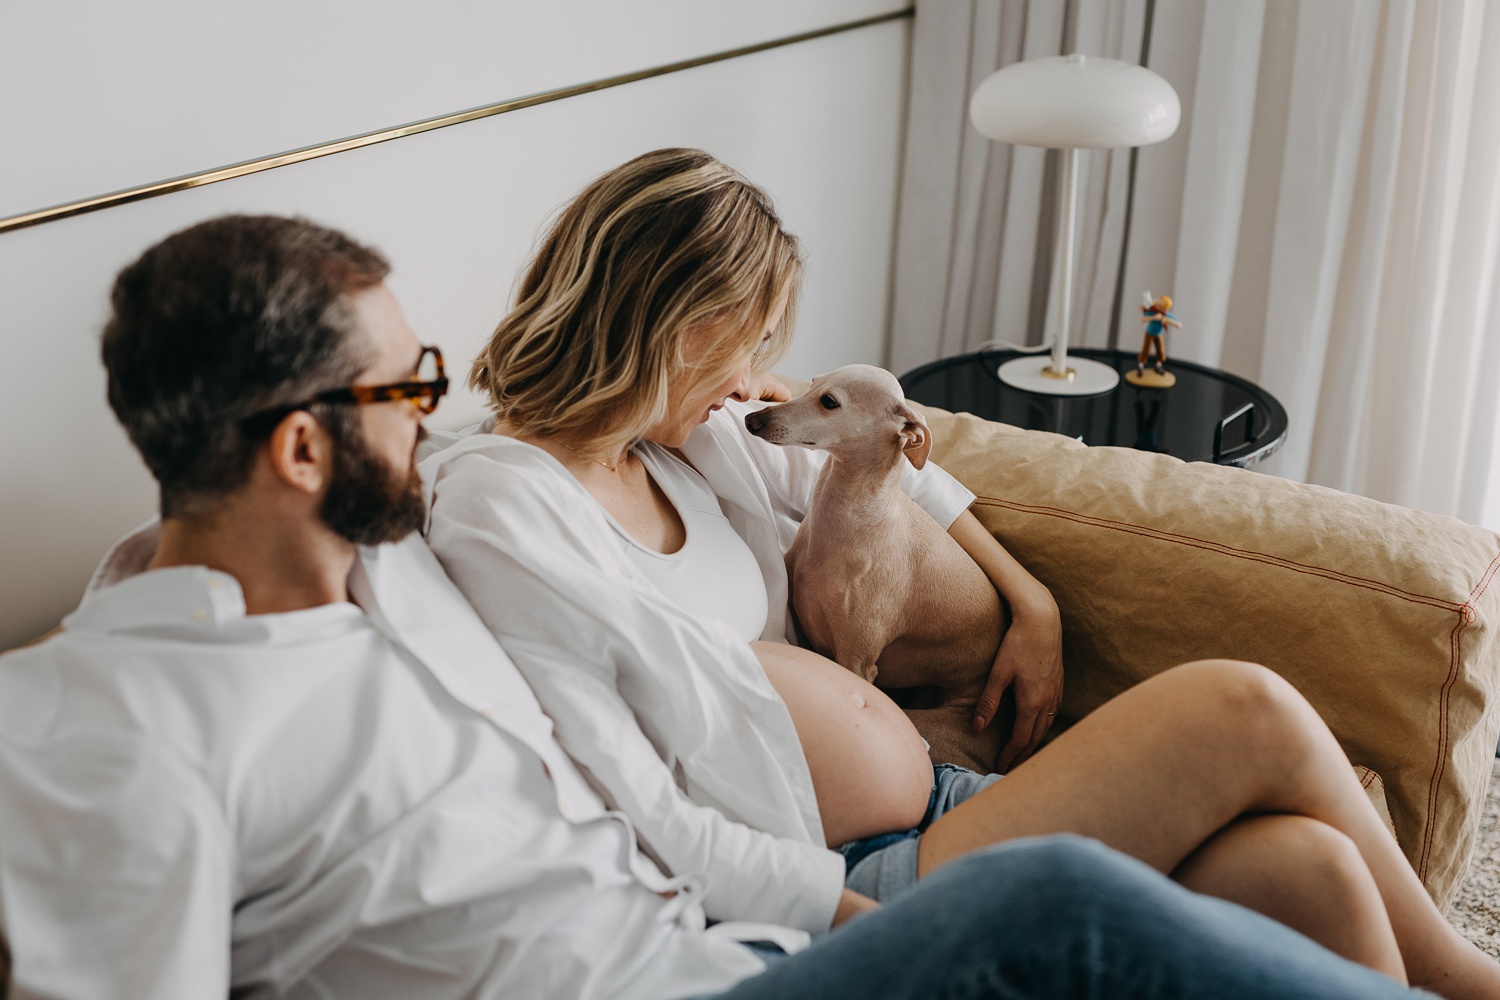 Pregnant woman and her dog sharing a special moment